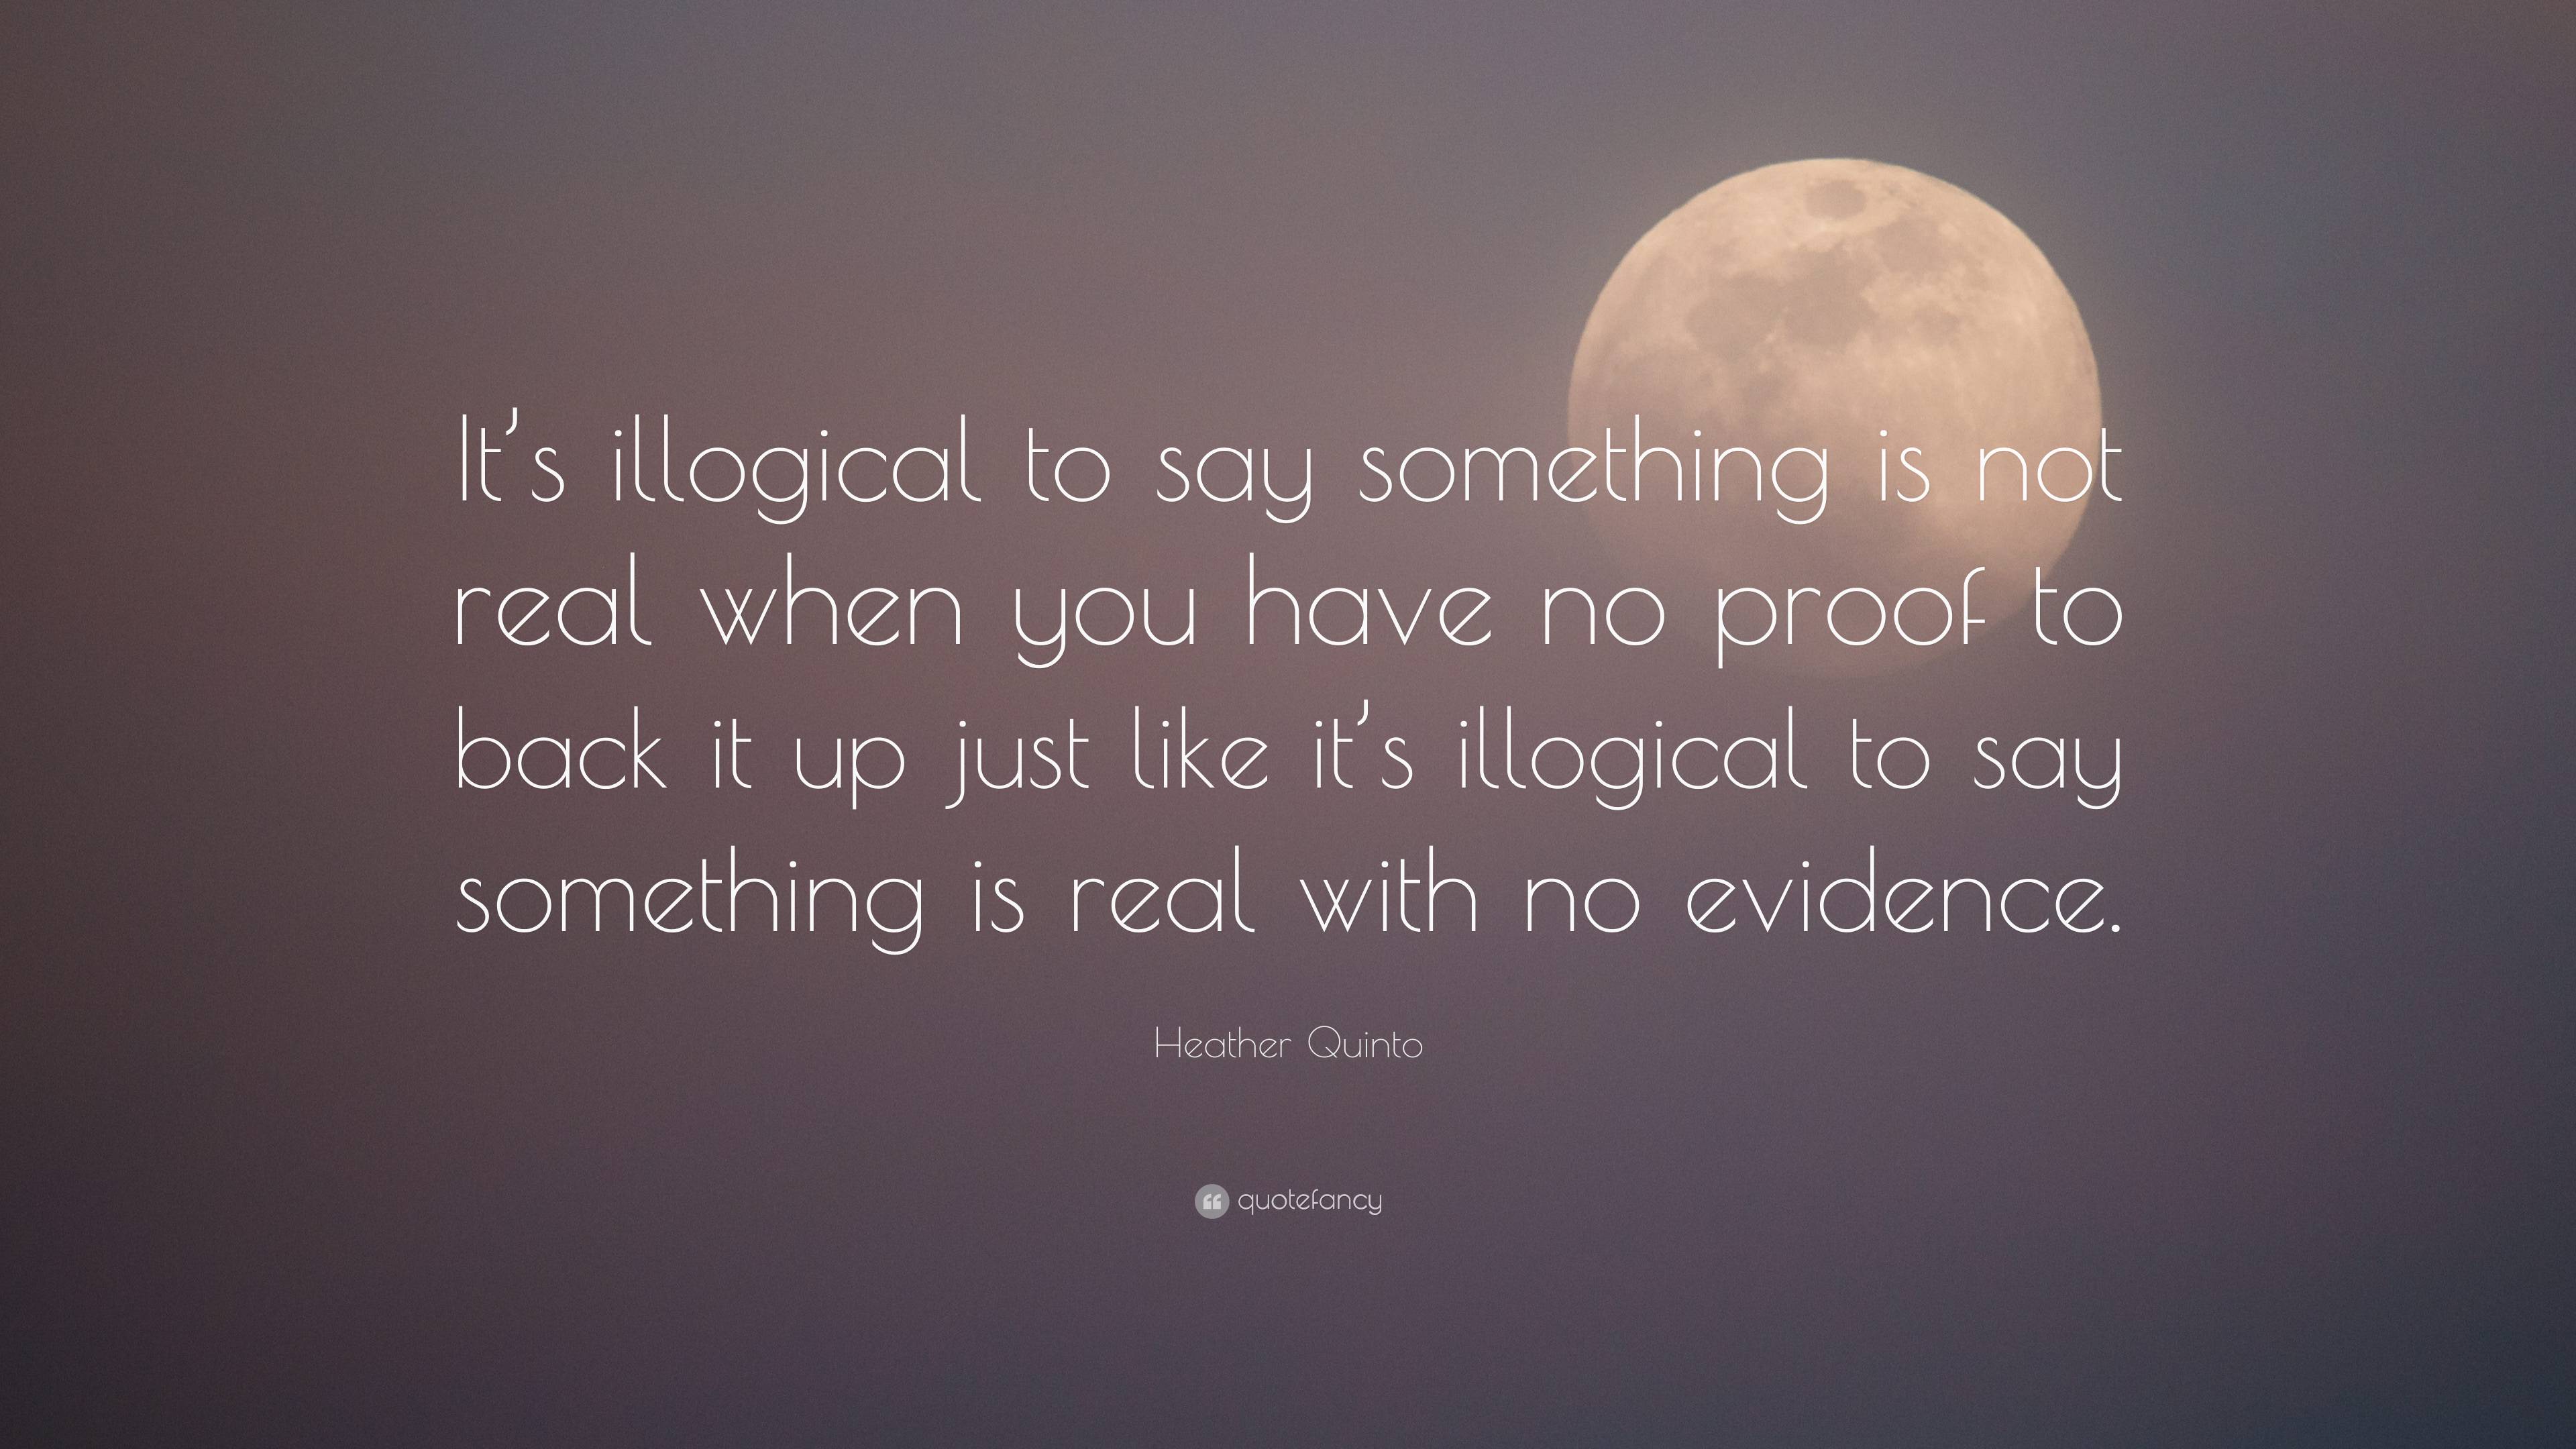 Heather Quinto Quote: “It’s illogical to say something is not real when ...